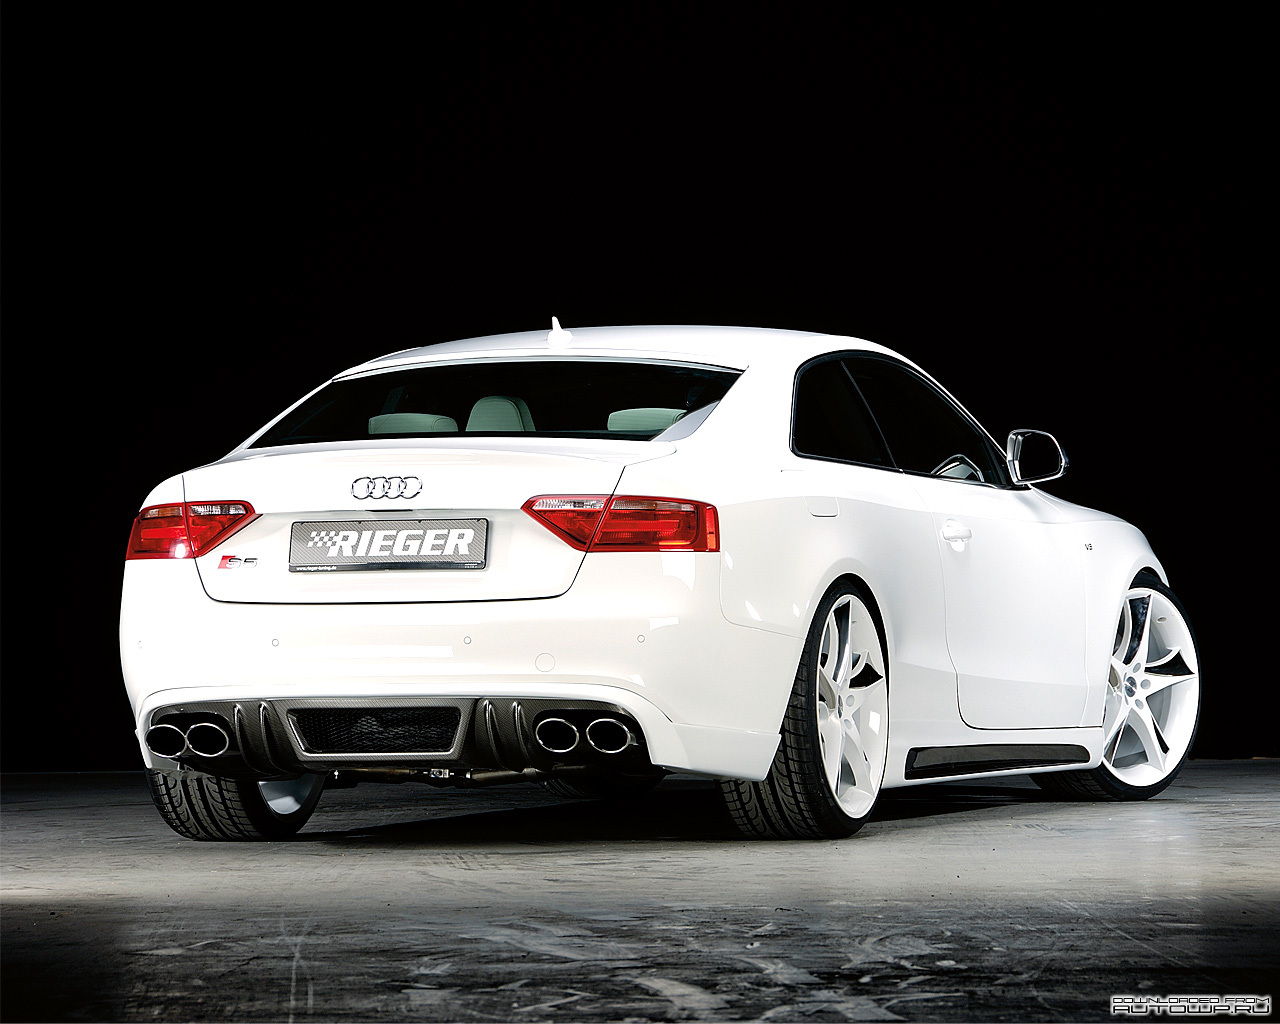 Audi S5 Wallpaper Cars And Pictures Car Image